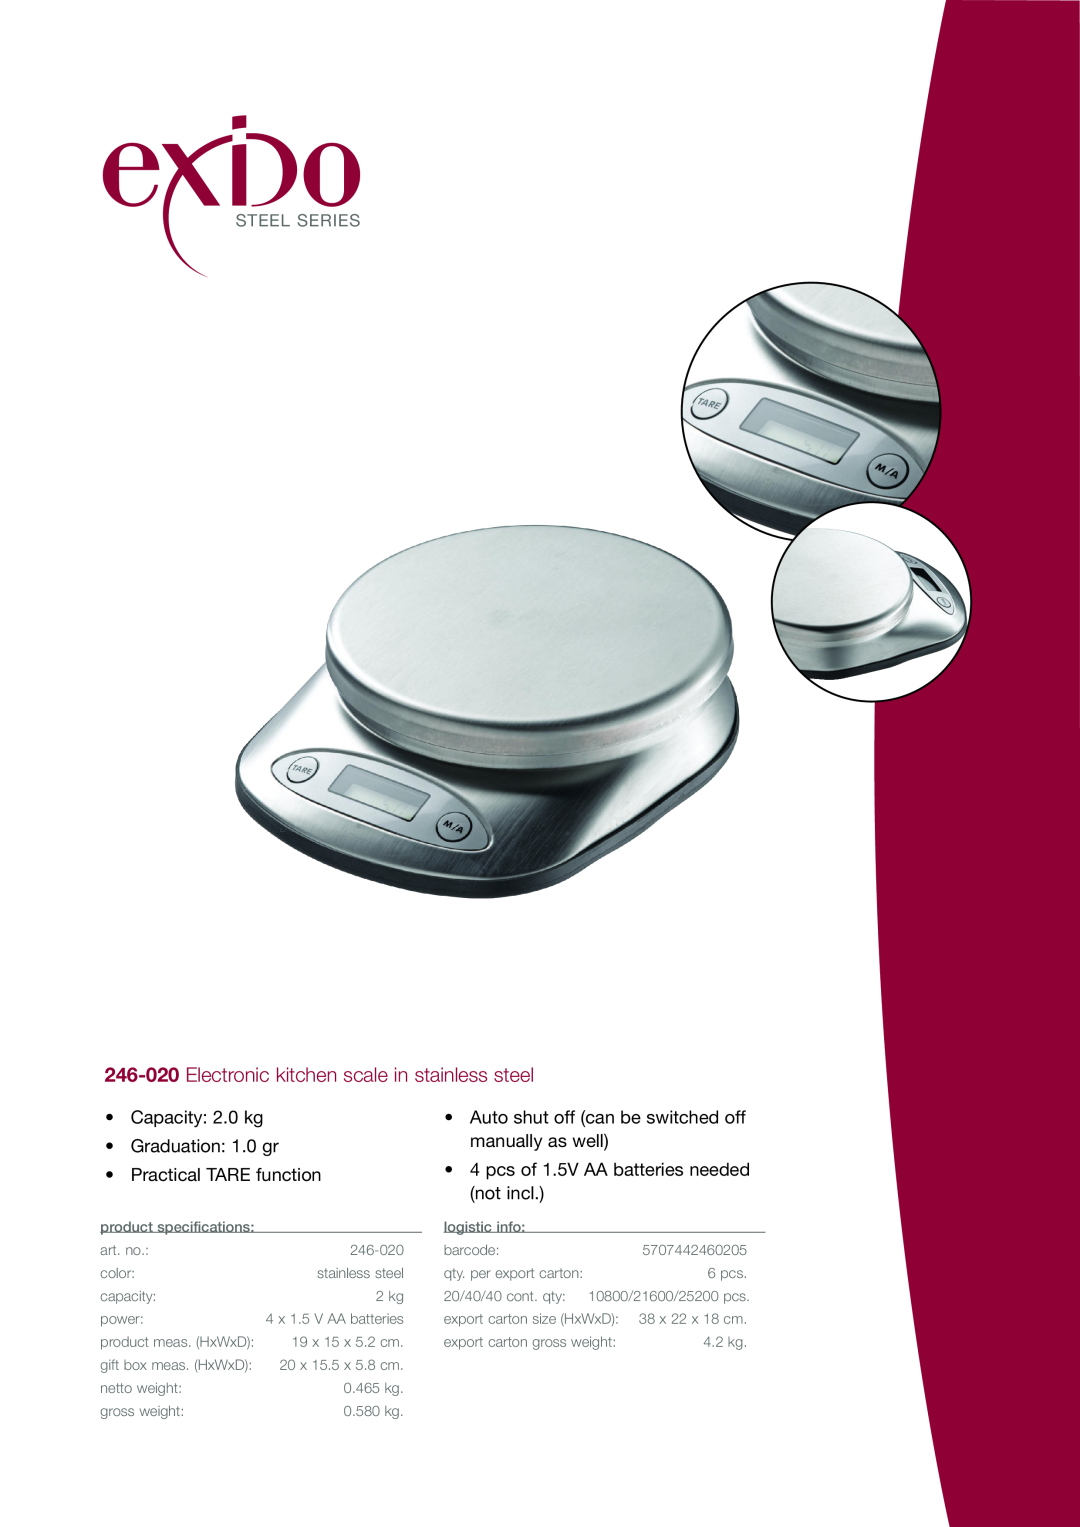 Exido 246-020 specifications Electronic kitchen scale in stainless steel, Steel Series 